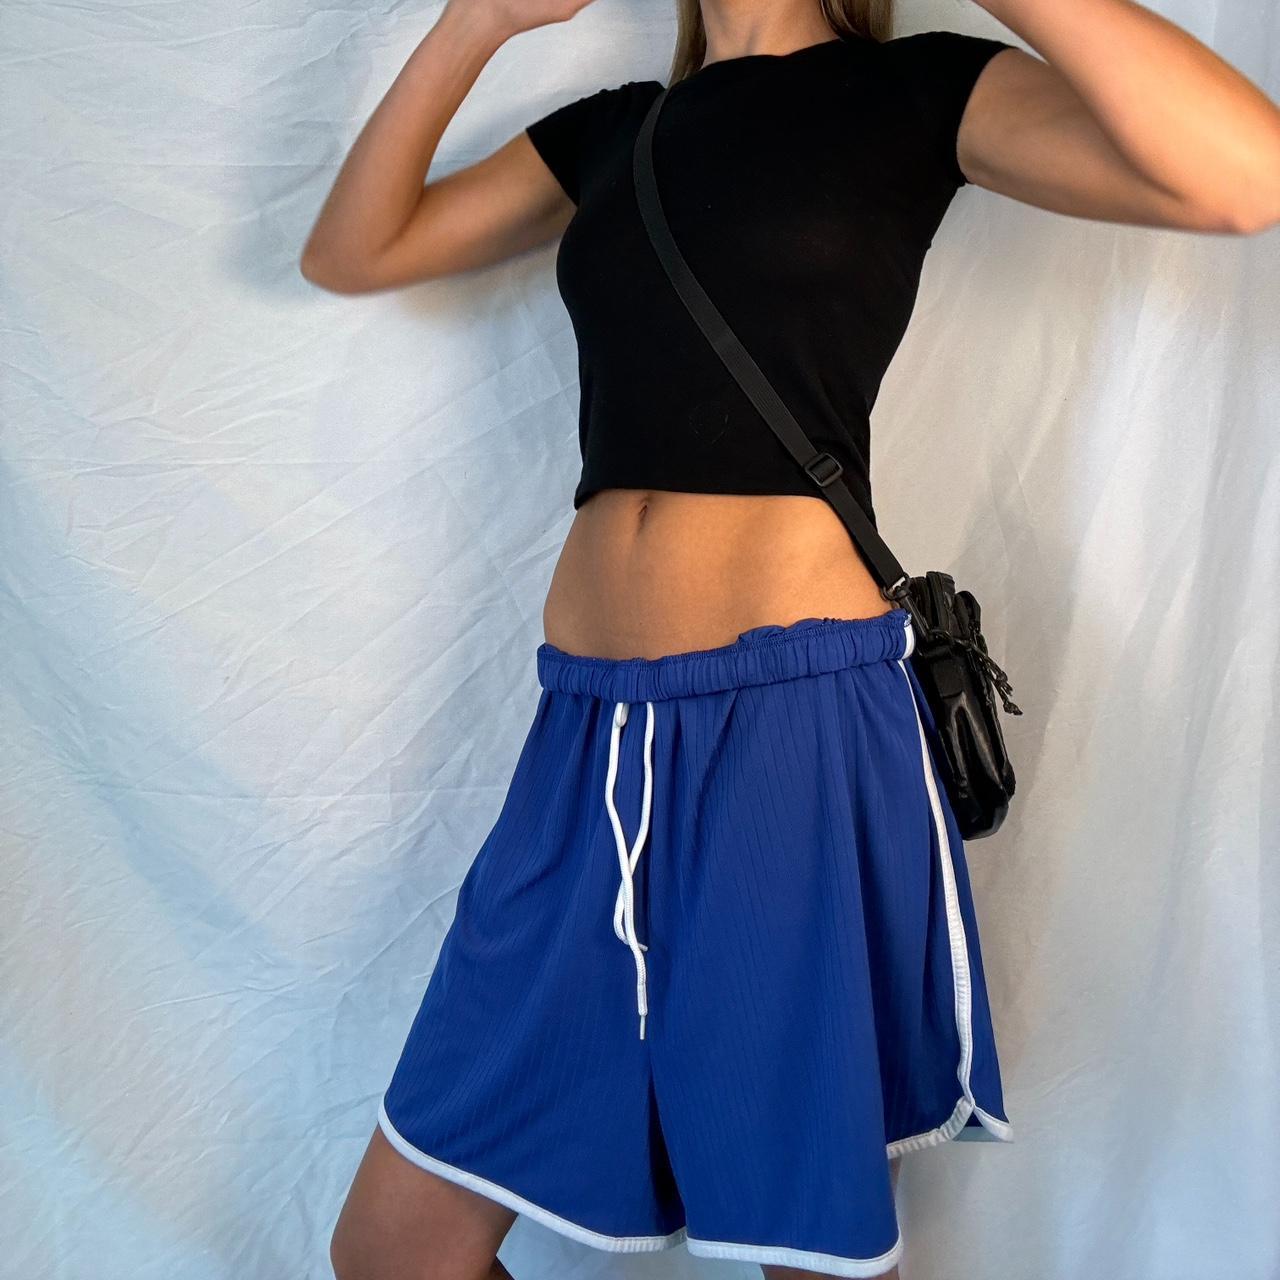 Full Circle Trends Women's Blue and White Shorts (2)